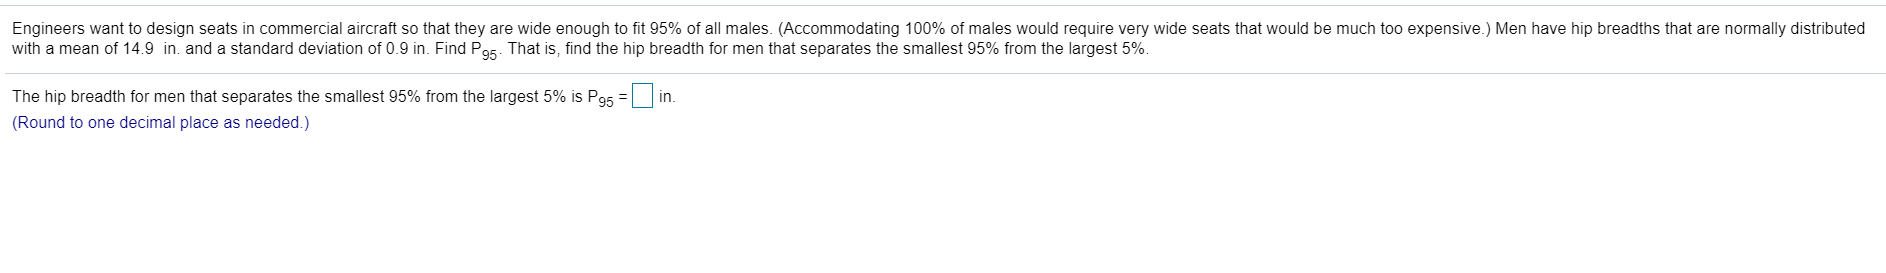 Engineers want to design seats in commercial aircraft so that they are wide enough to fit 95% of all males. (Accommodating 100% of males would require very wide seats that would be much too expensive.) Men have hip breadths that are normally distributed
with a mean of 14.9 in. and a standard deviation of 0.9 in. Find P95. That is, find the hip breadth for men that separates the smallest 95% from the largest 5%.
The hip breadth for men that separates the smallest 95% from the largest 5% is P95 = in.
(Round to one decimal place as needed.)
